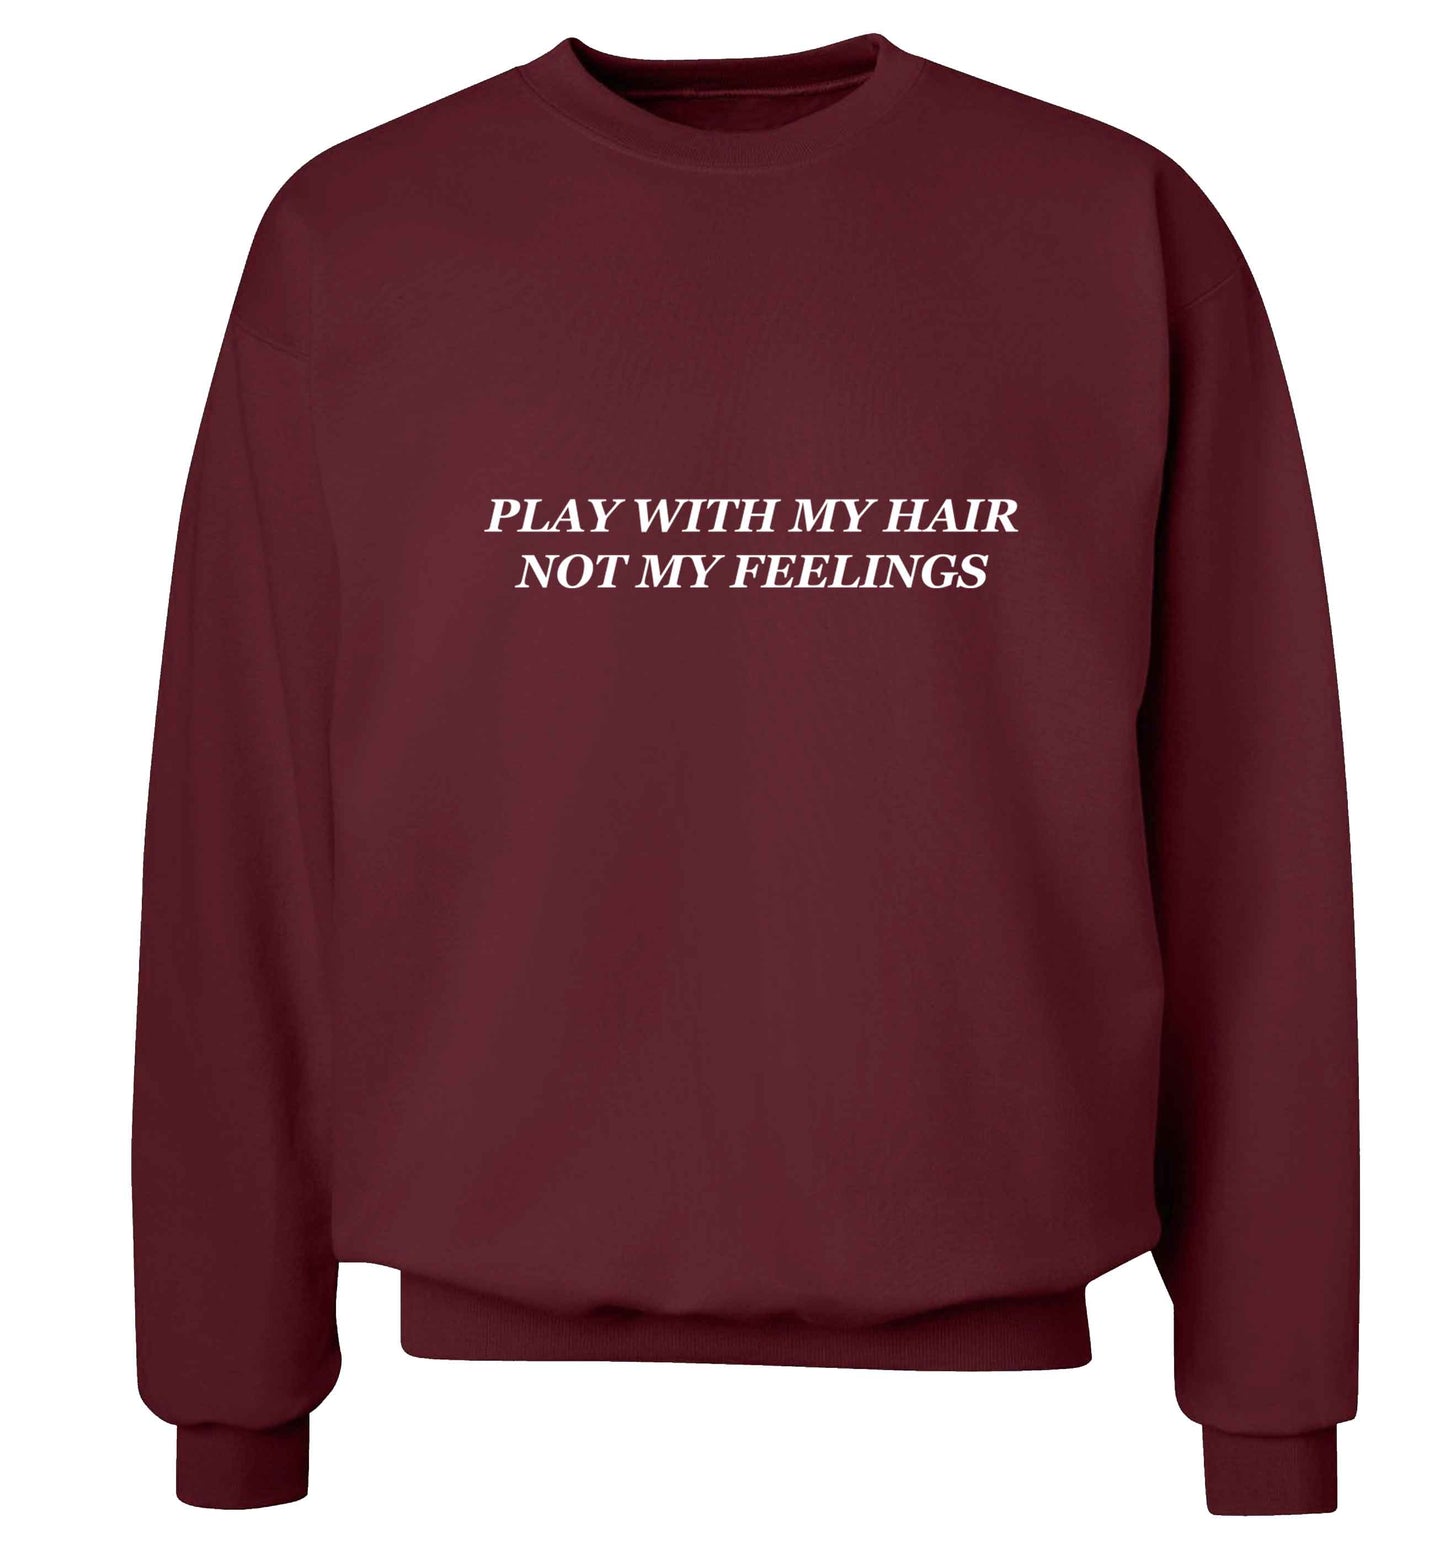 Play with my hair not my feelings adult's unisex maroon sweater 2XL